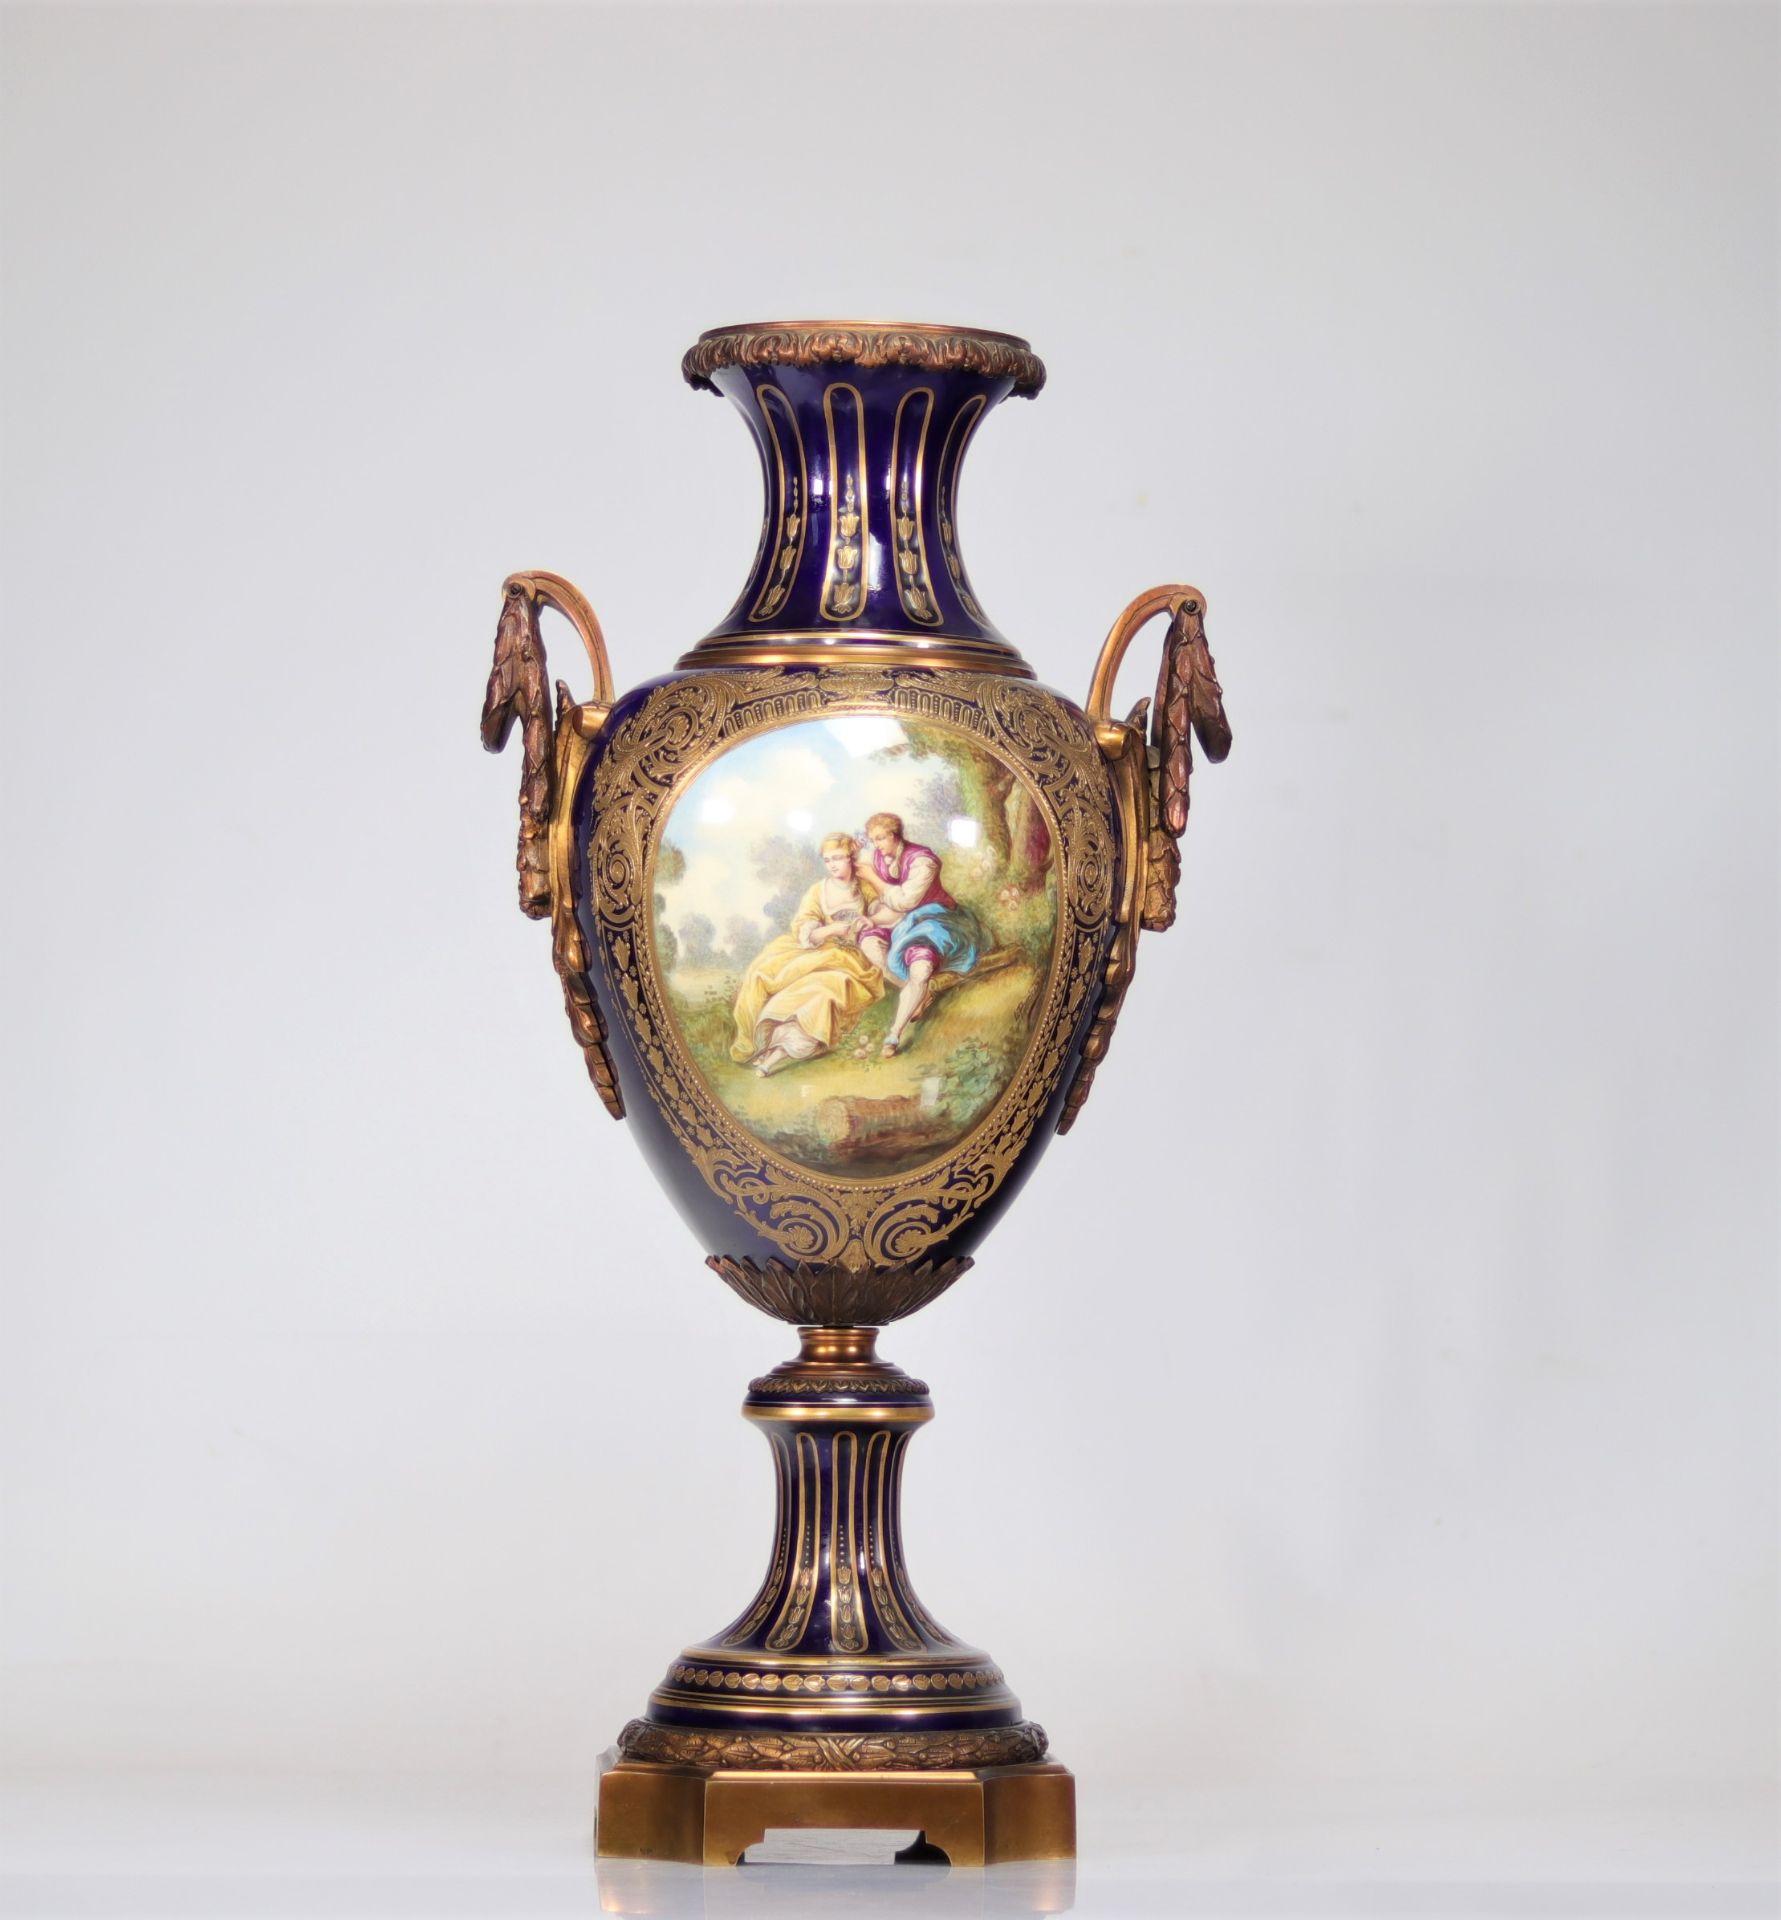 Imposing Sevres porcelain decorated with a romantic scene - Image 4 of 5